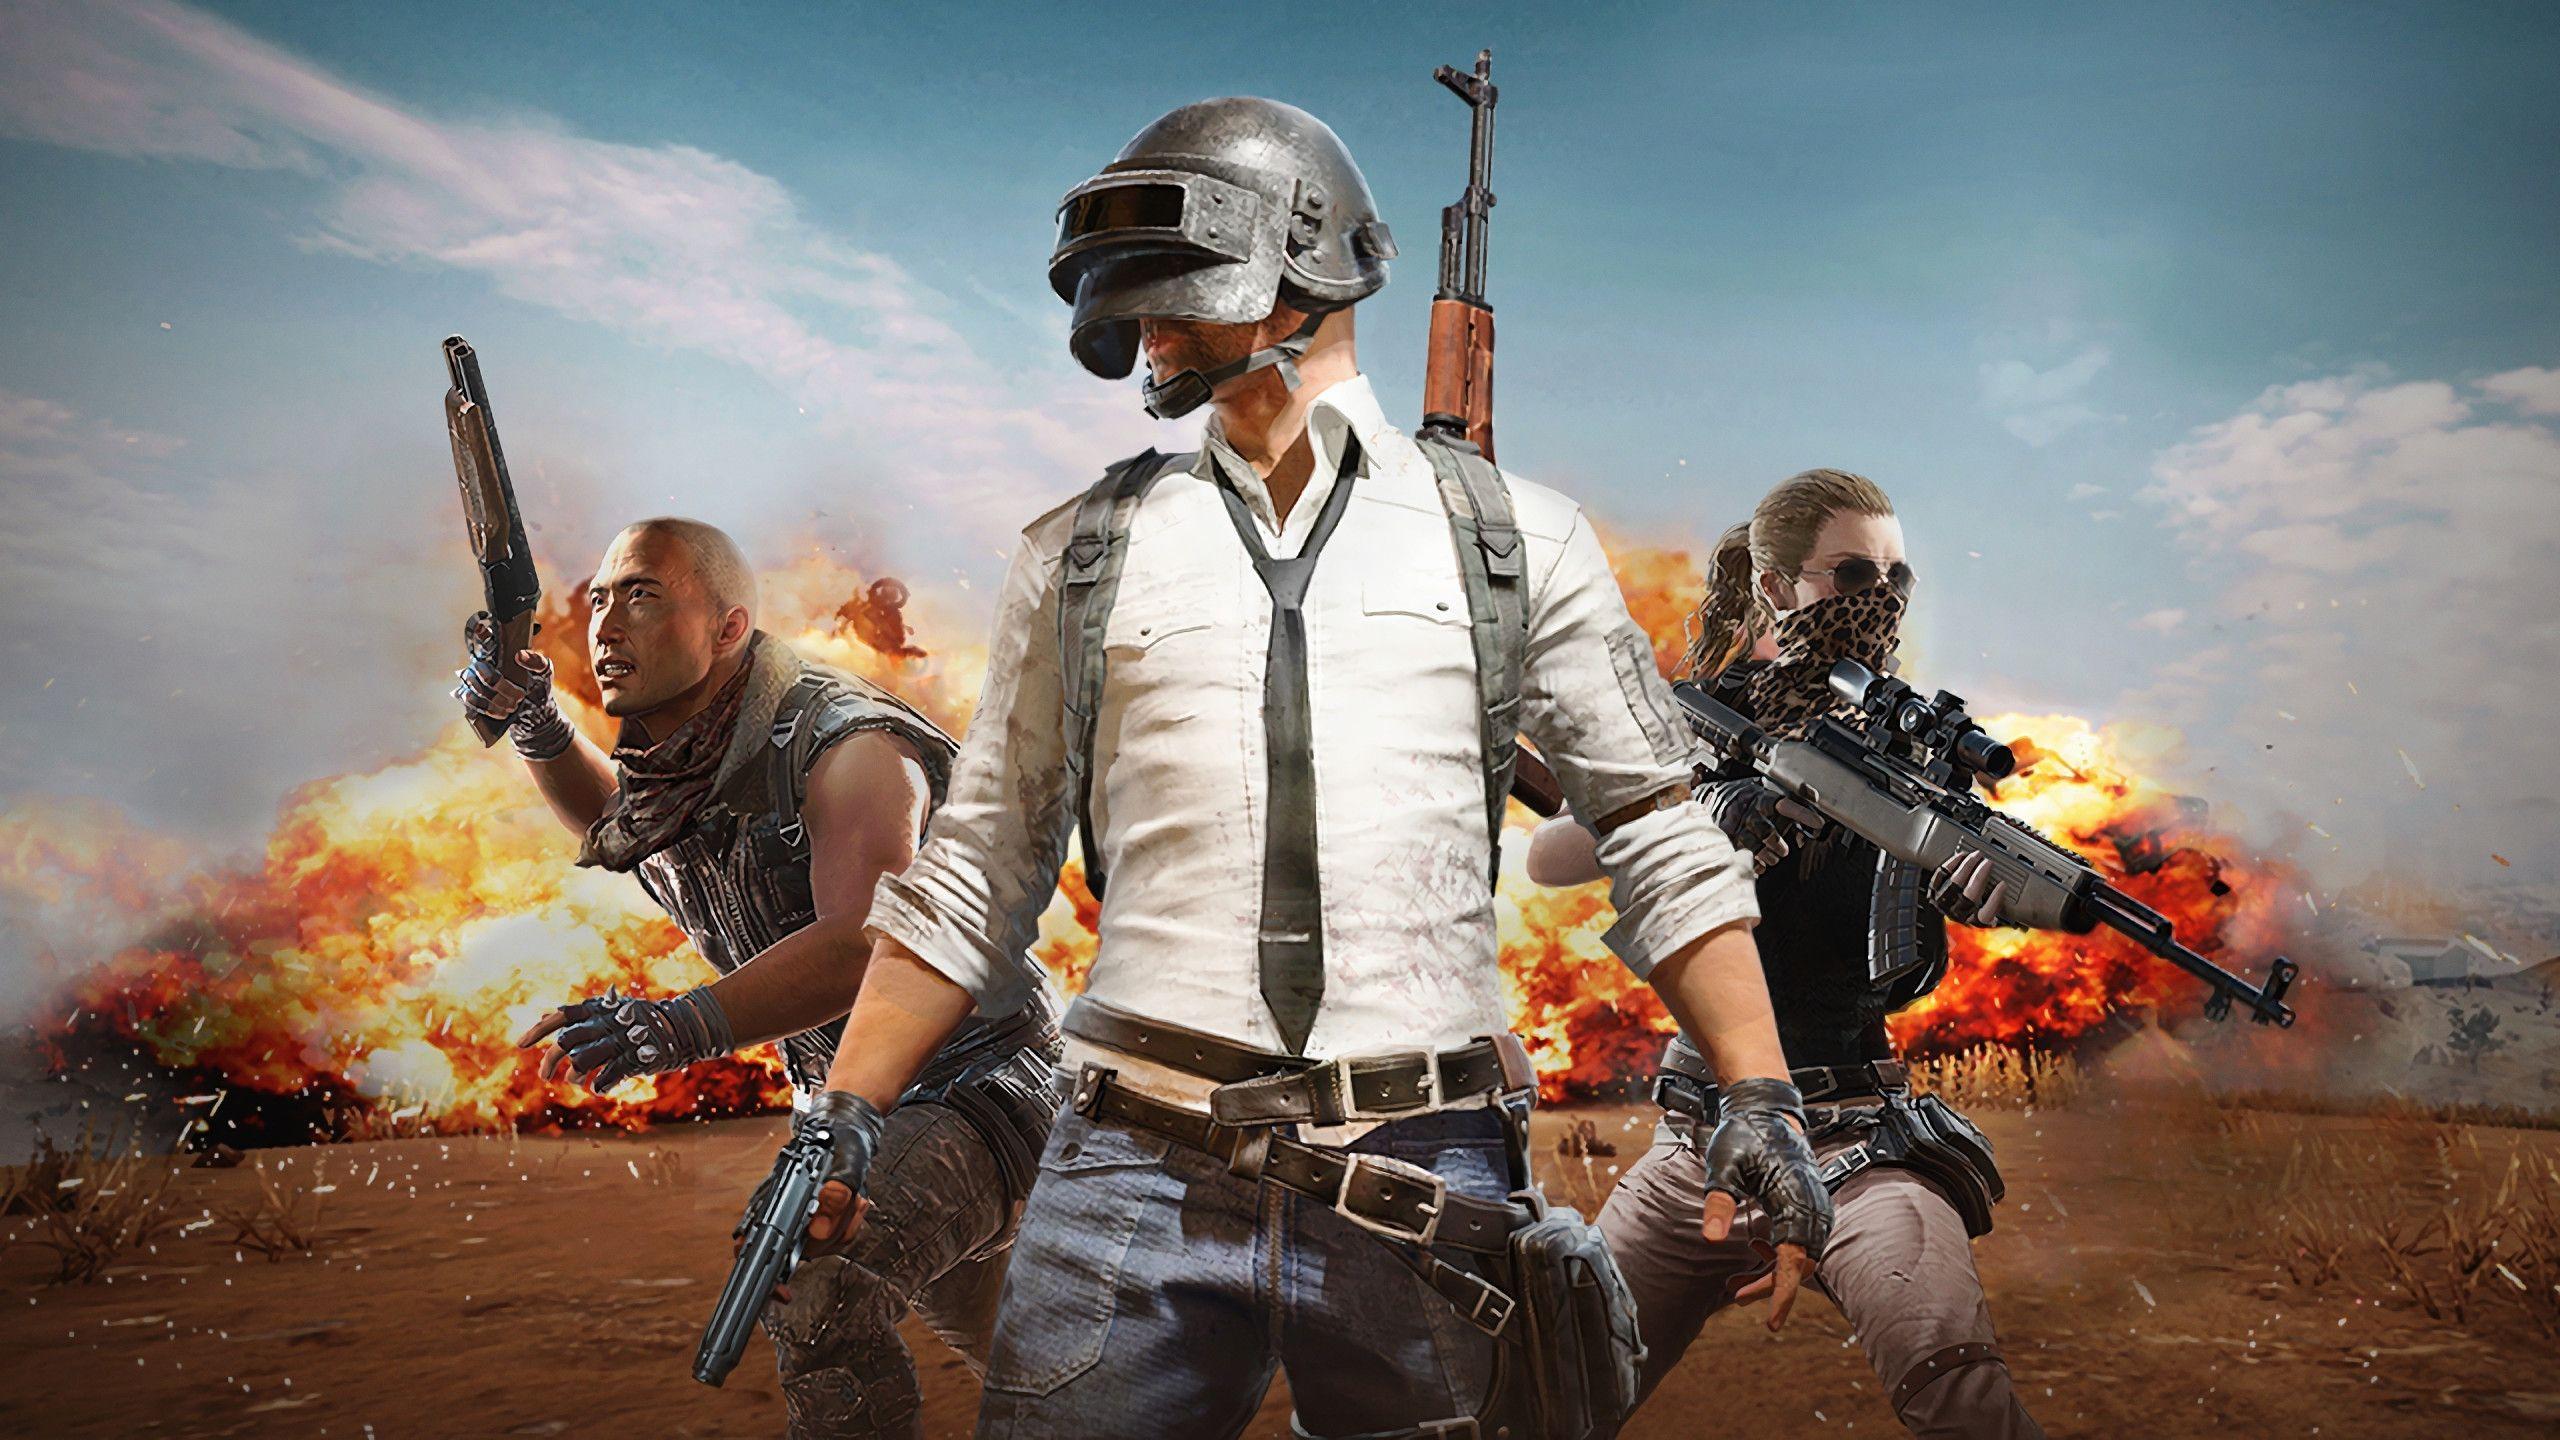 2560x1440 Pubg Wallpapers Top Free 2560x1440 Pubg Backgrounds